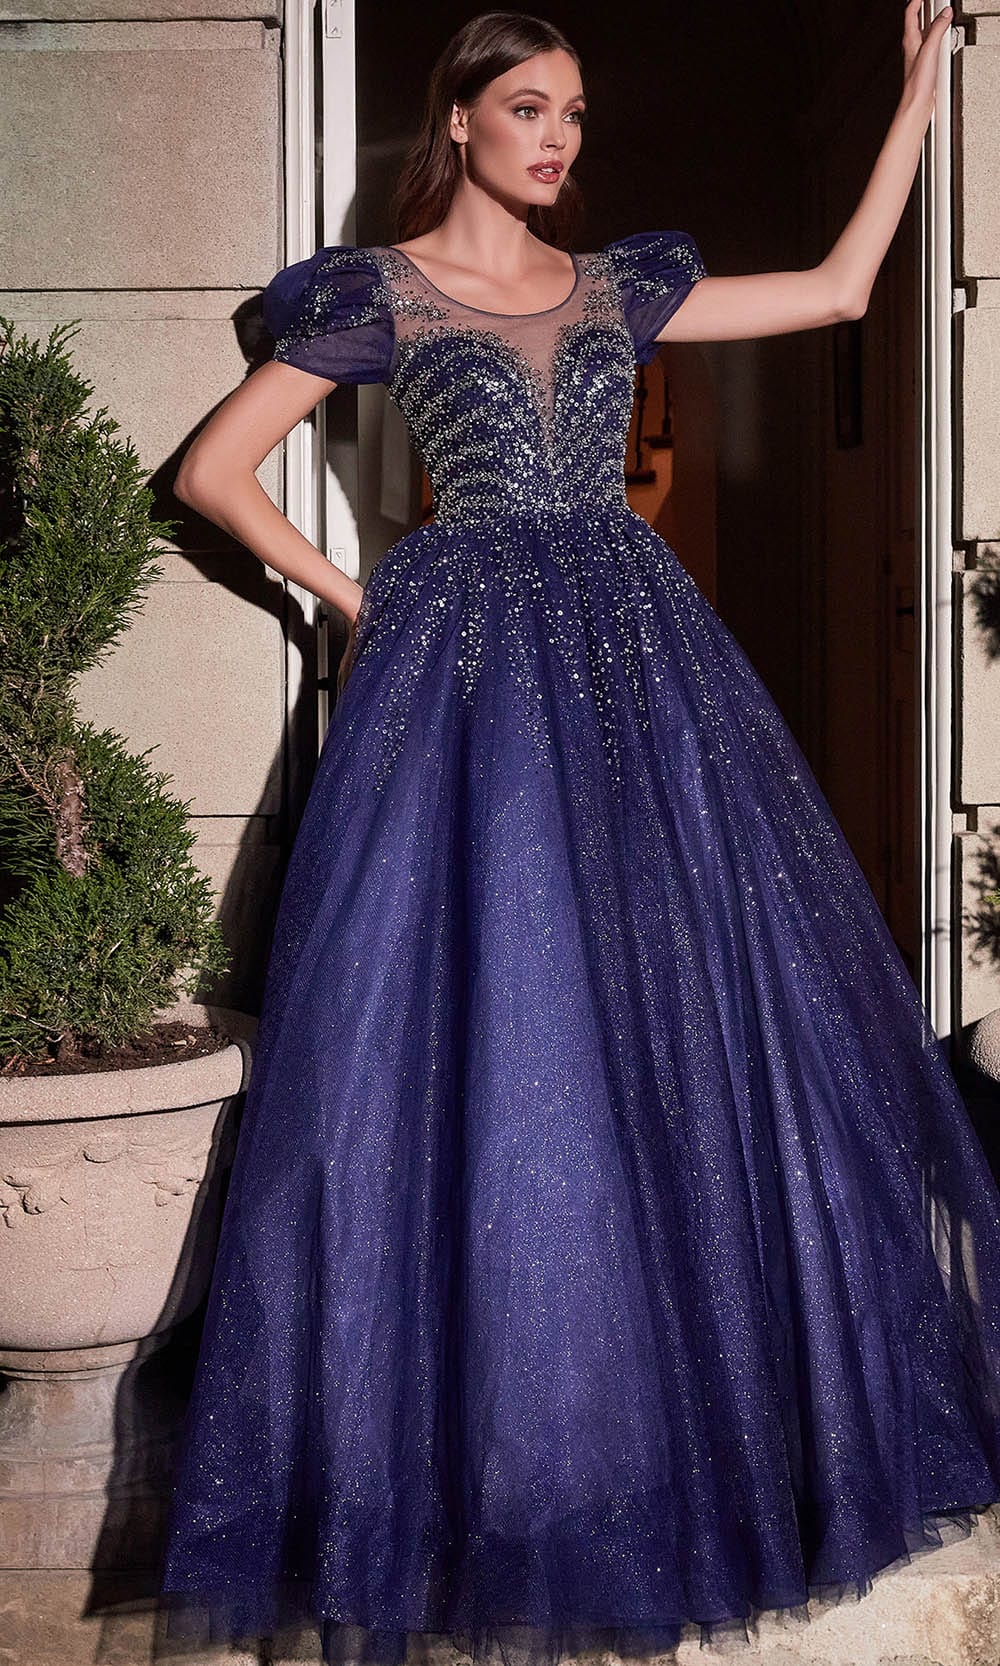 Cinderella Divine B702 - Beaded Ball gown Special Occasion Dress 2 / Navy